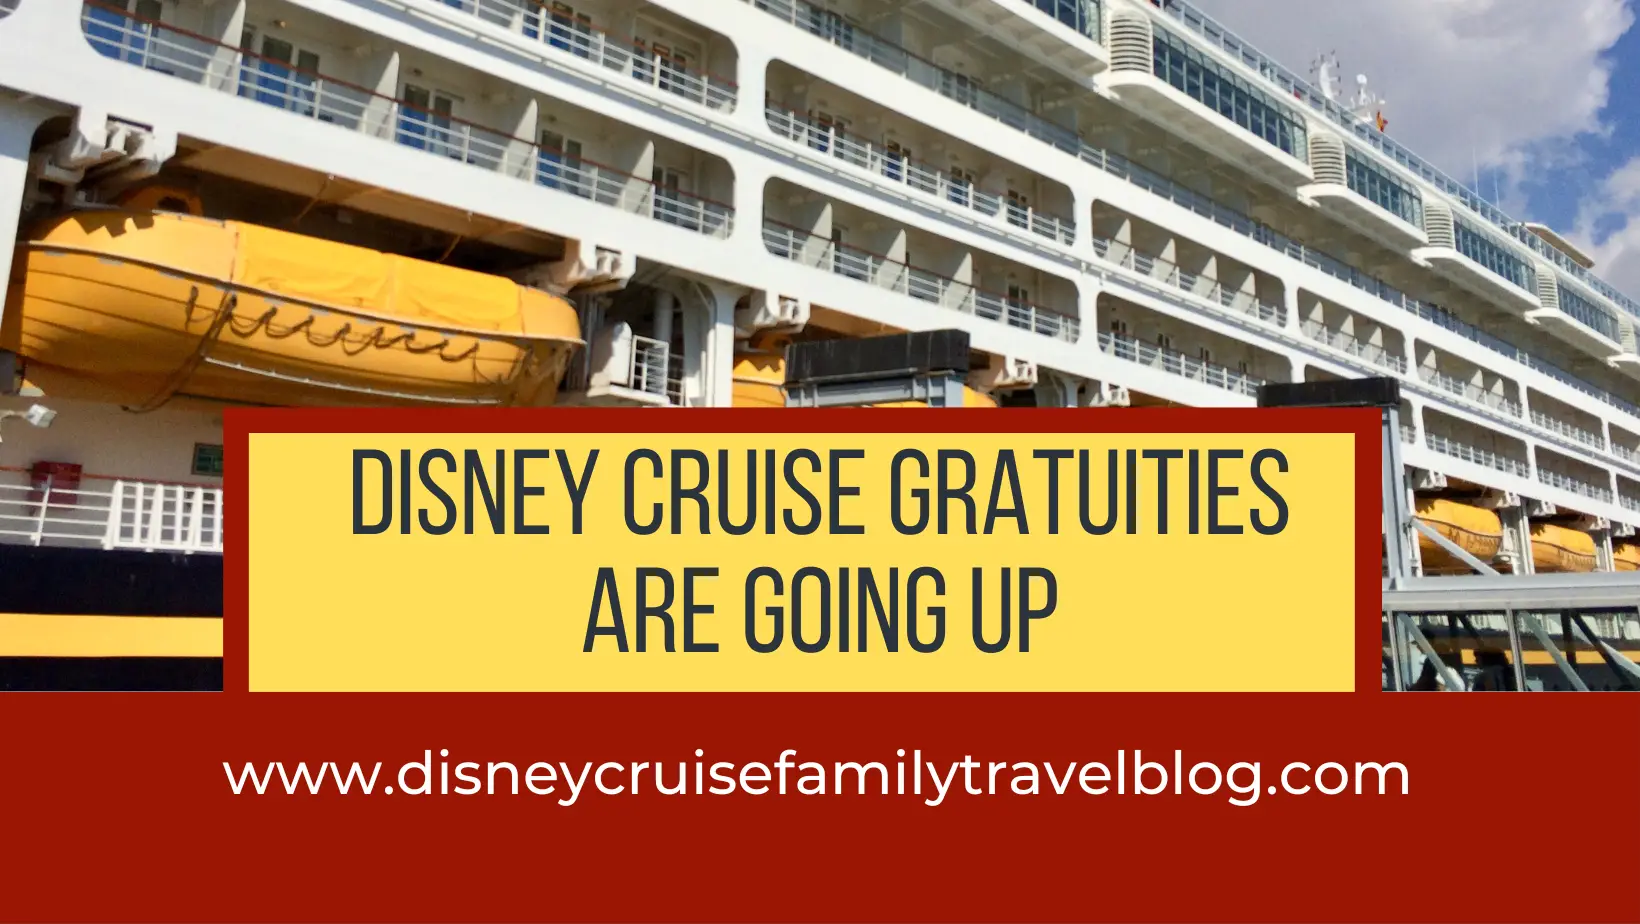 Disney Cruise Gratuities are Going Up The Disney Cruise Family Travel